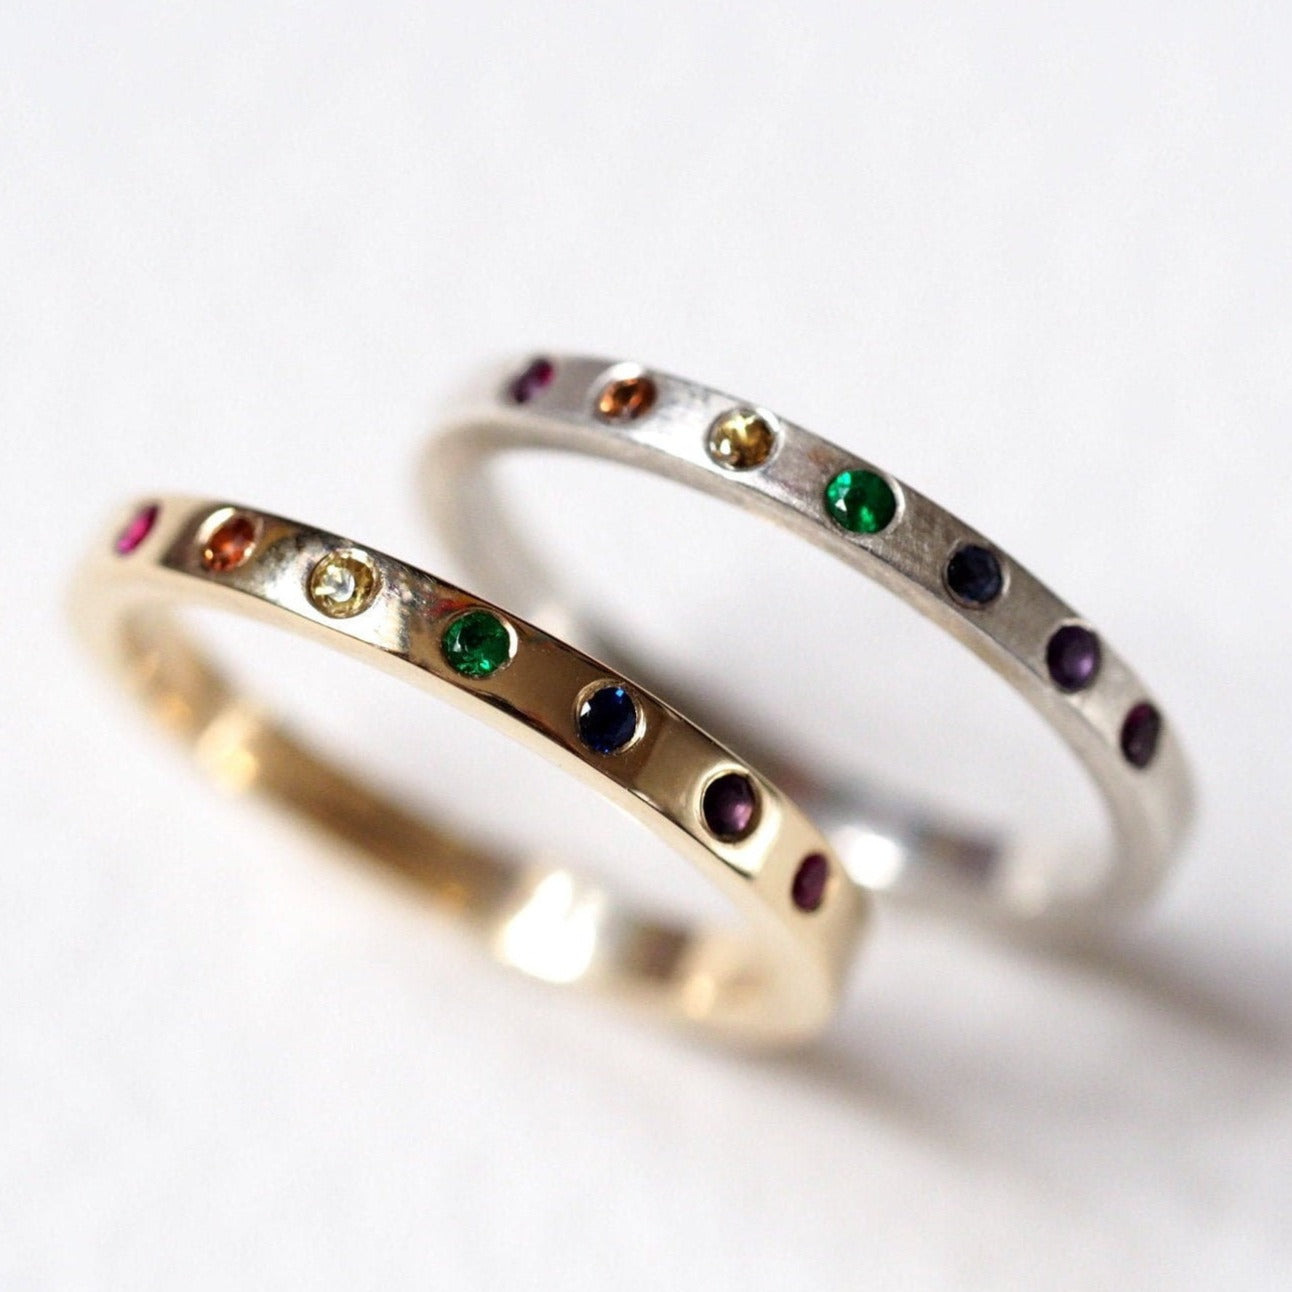 Rainbow Ring Handmade - Recycled Gold and Precious Stones